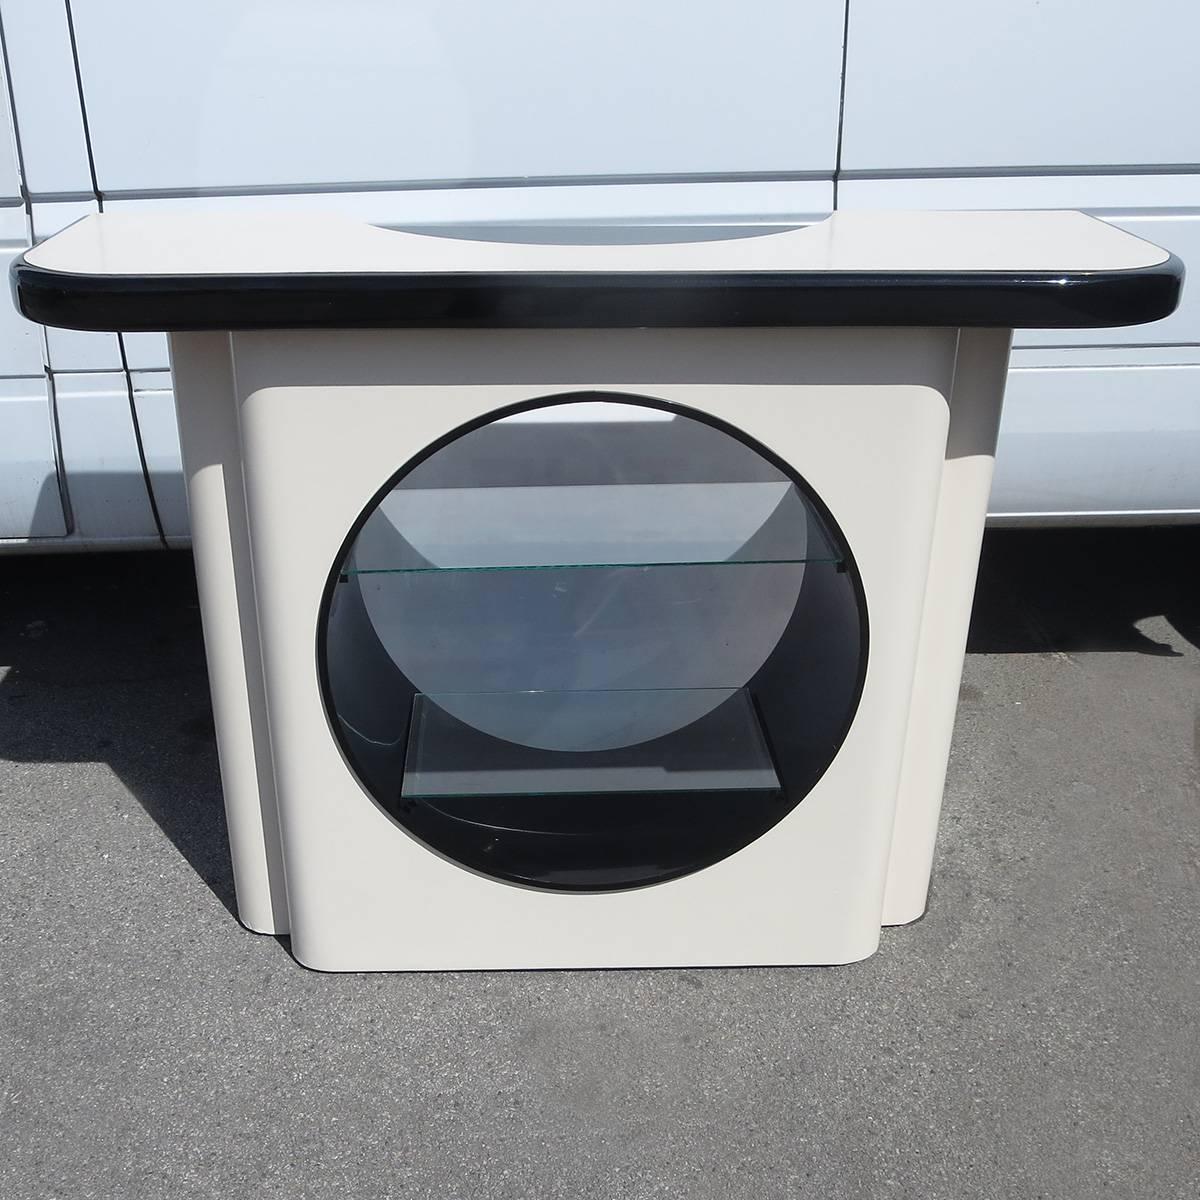 This wonderful bar is free standing, and easy to place anywhere. There is a very stylized porthole opening in the centre, with two shelves. You can access this area from the front or the rear of the bar. There are twelve bottle holders on the bar